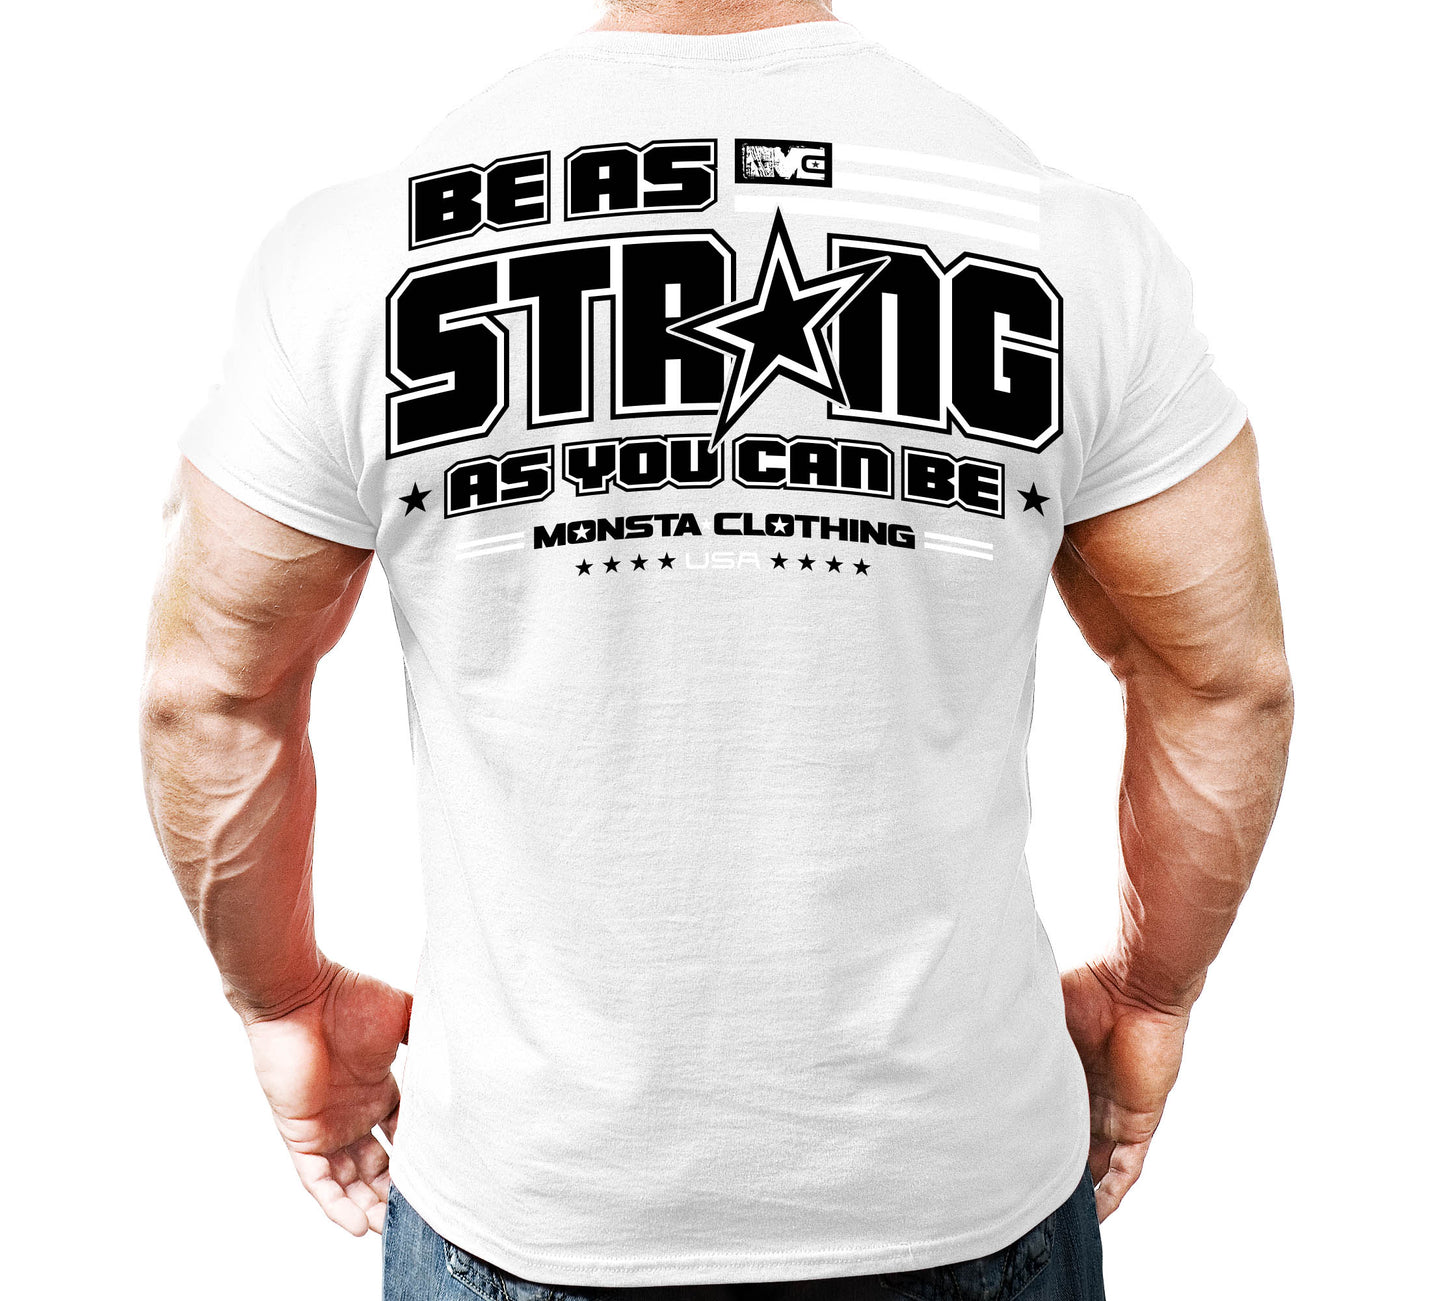 Be as STRONG as you can be-332: WT-BK